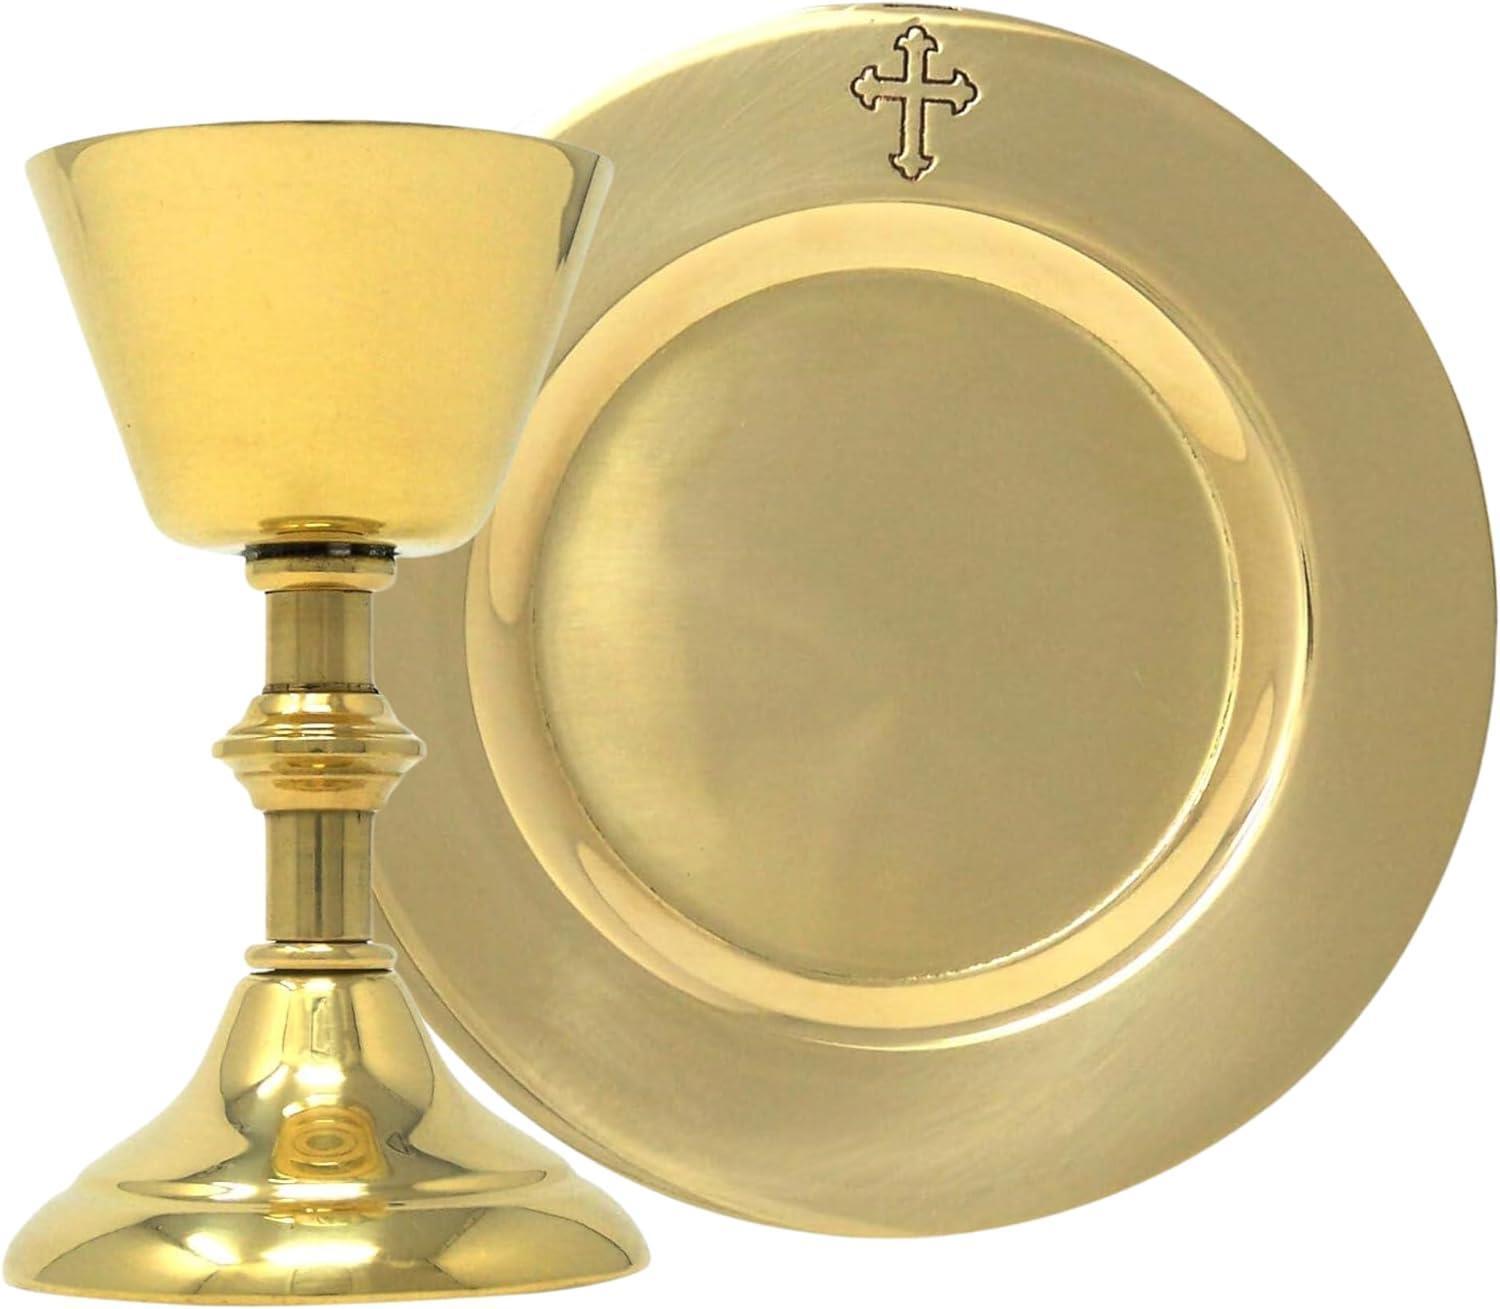 Miniature Polished Brass Chalice And Etched Paten Set for Sick Call Mass Kits